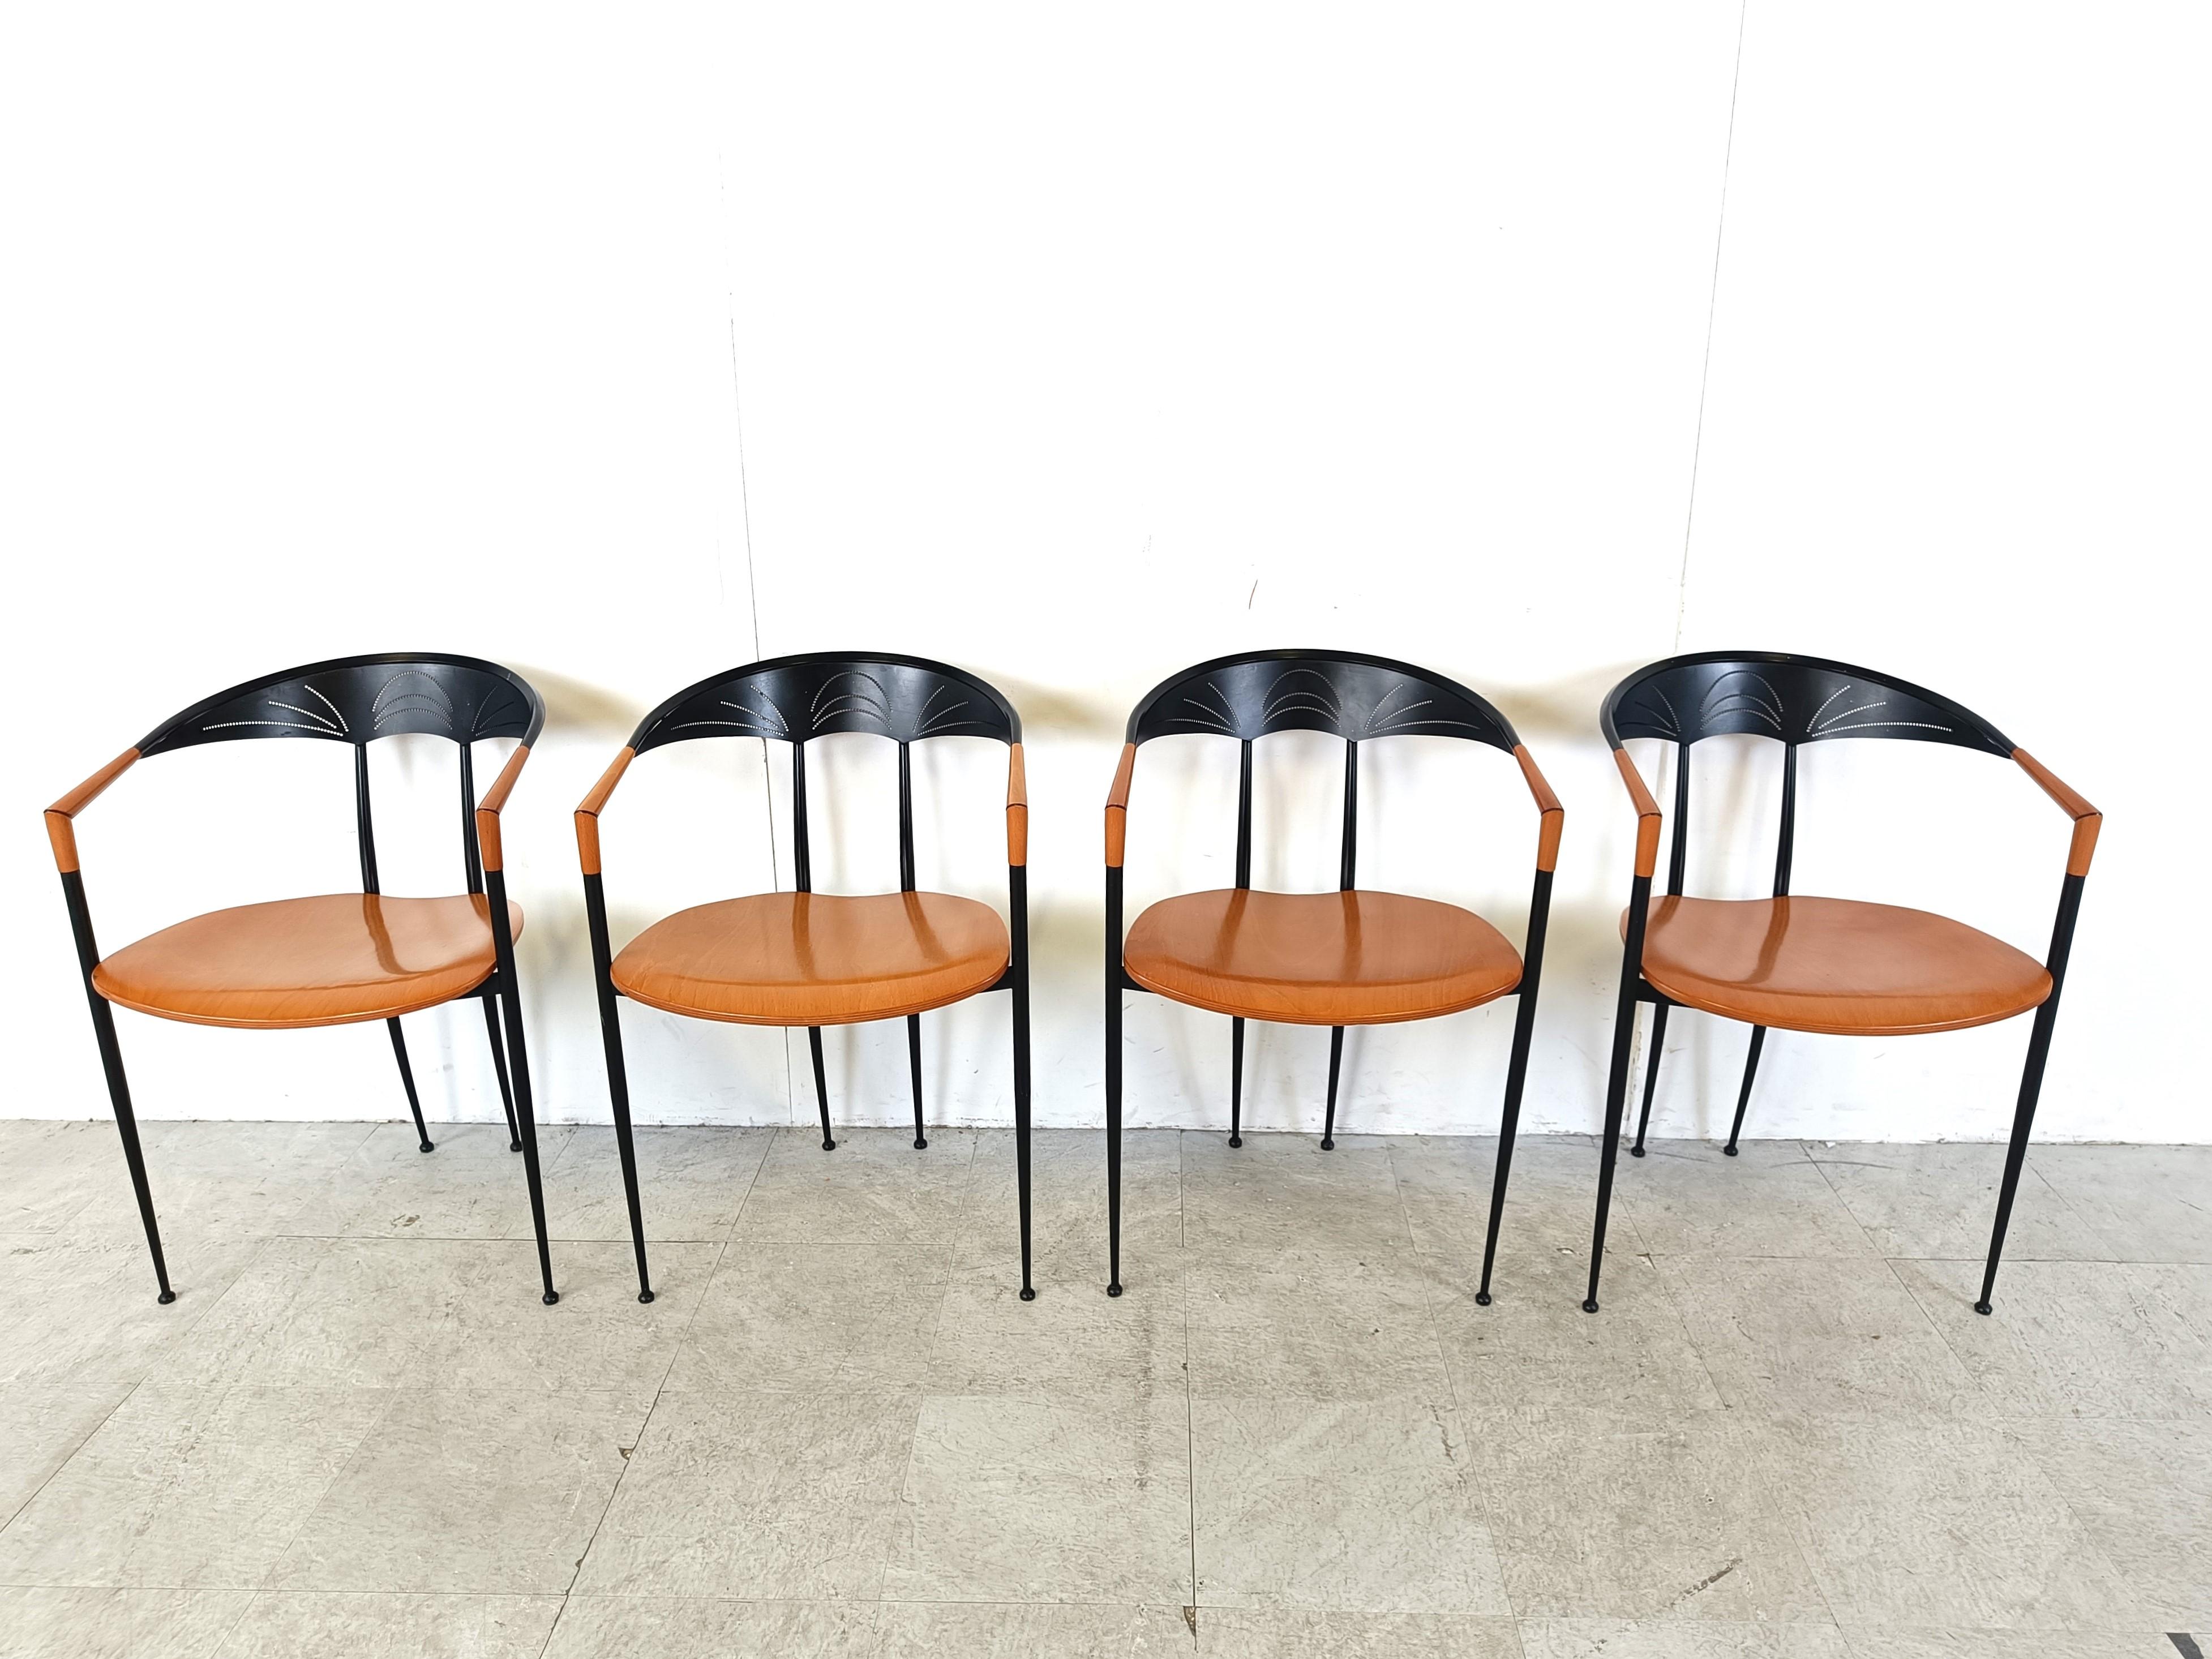 Italian Set of 4 post modern dining chairs by Tetide Italy - 1980s For Sale